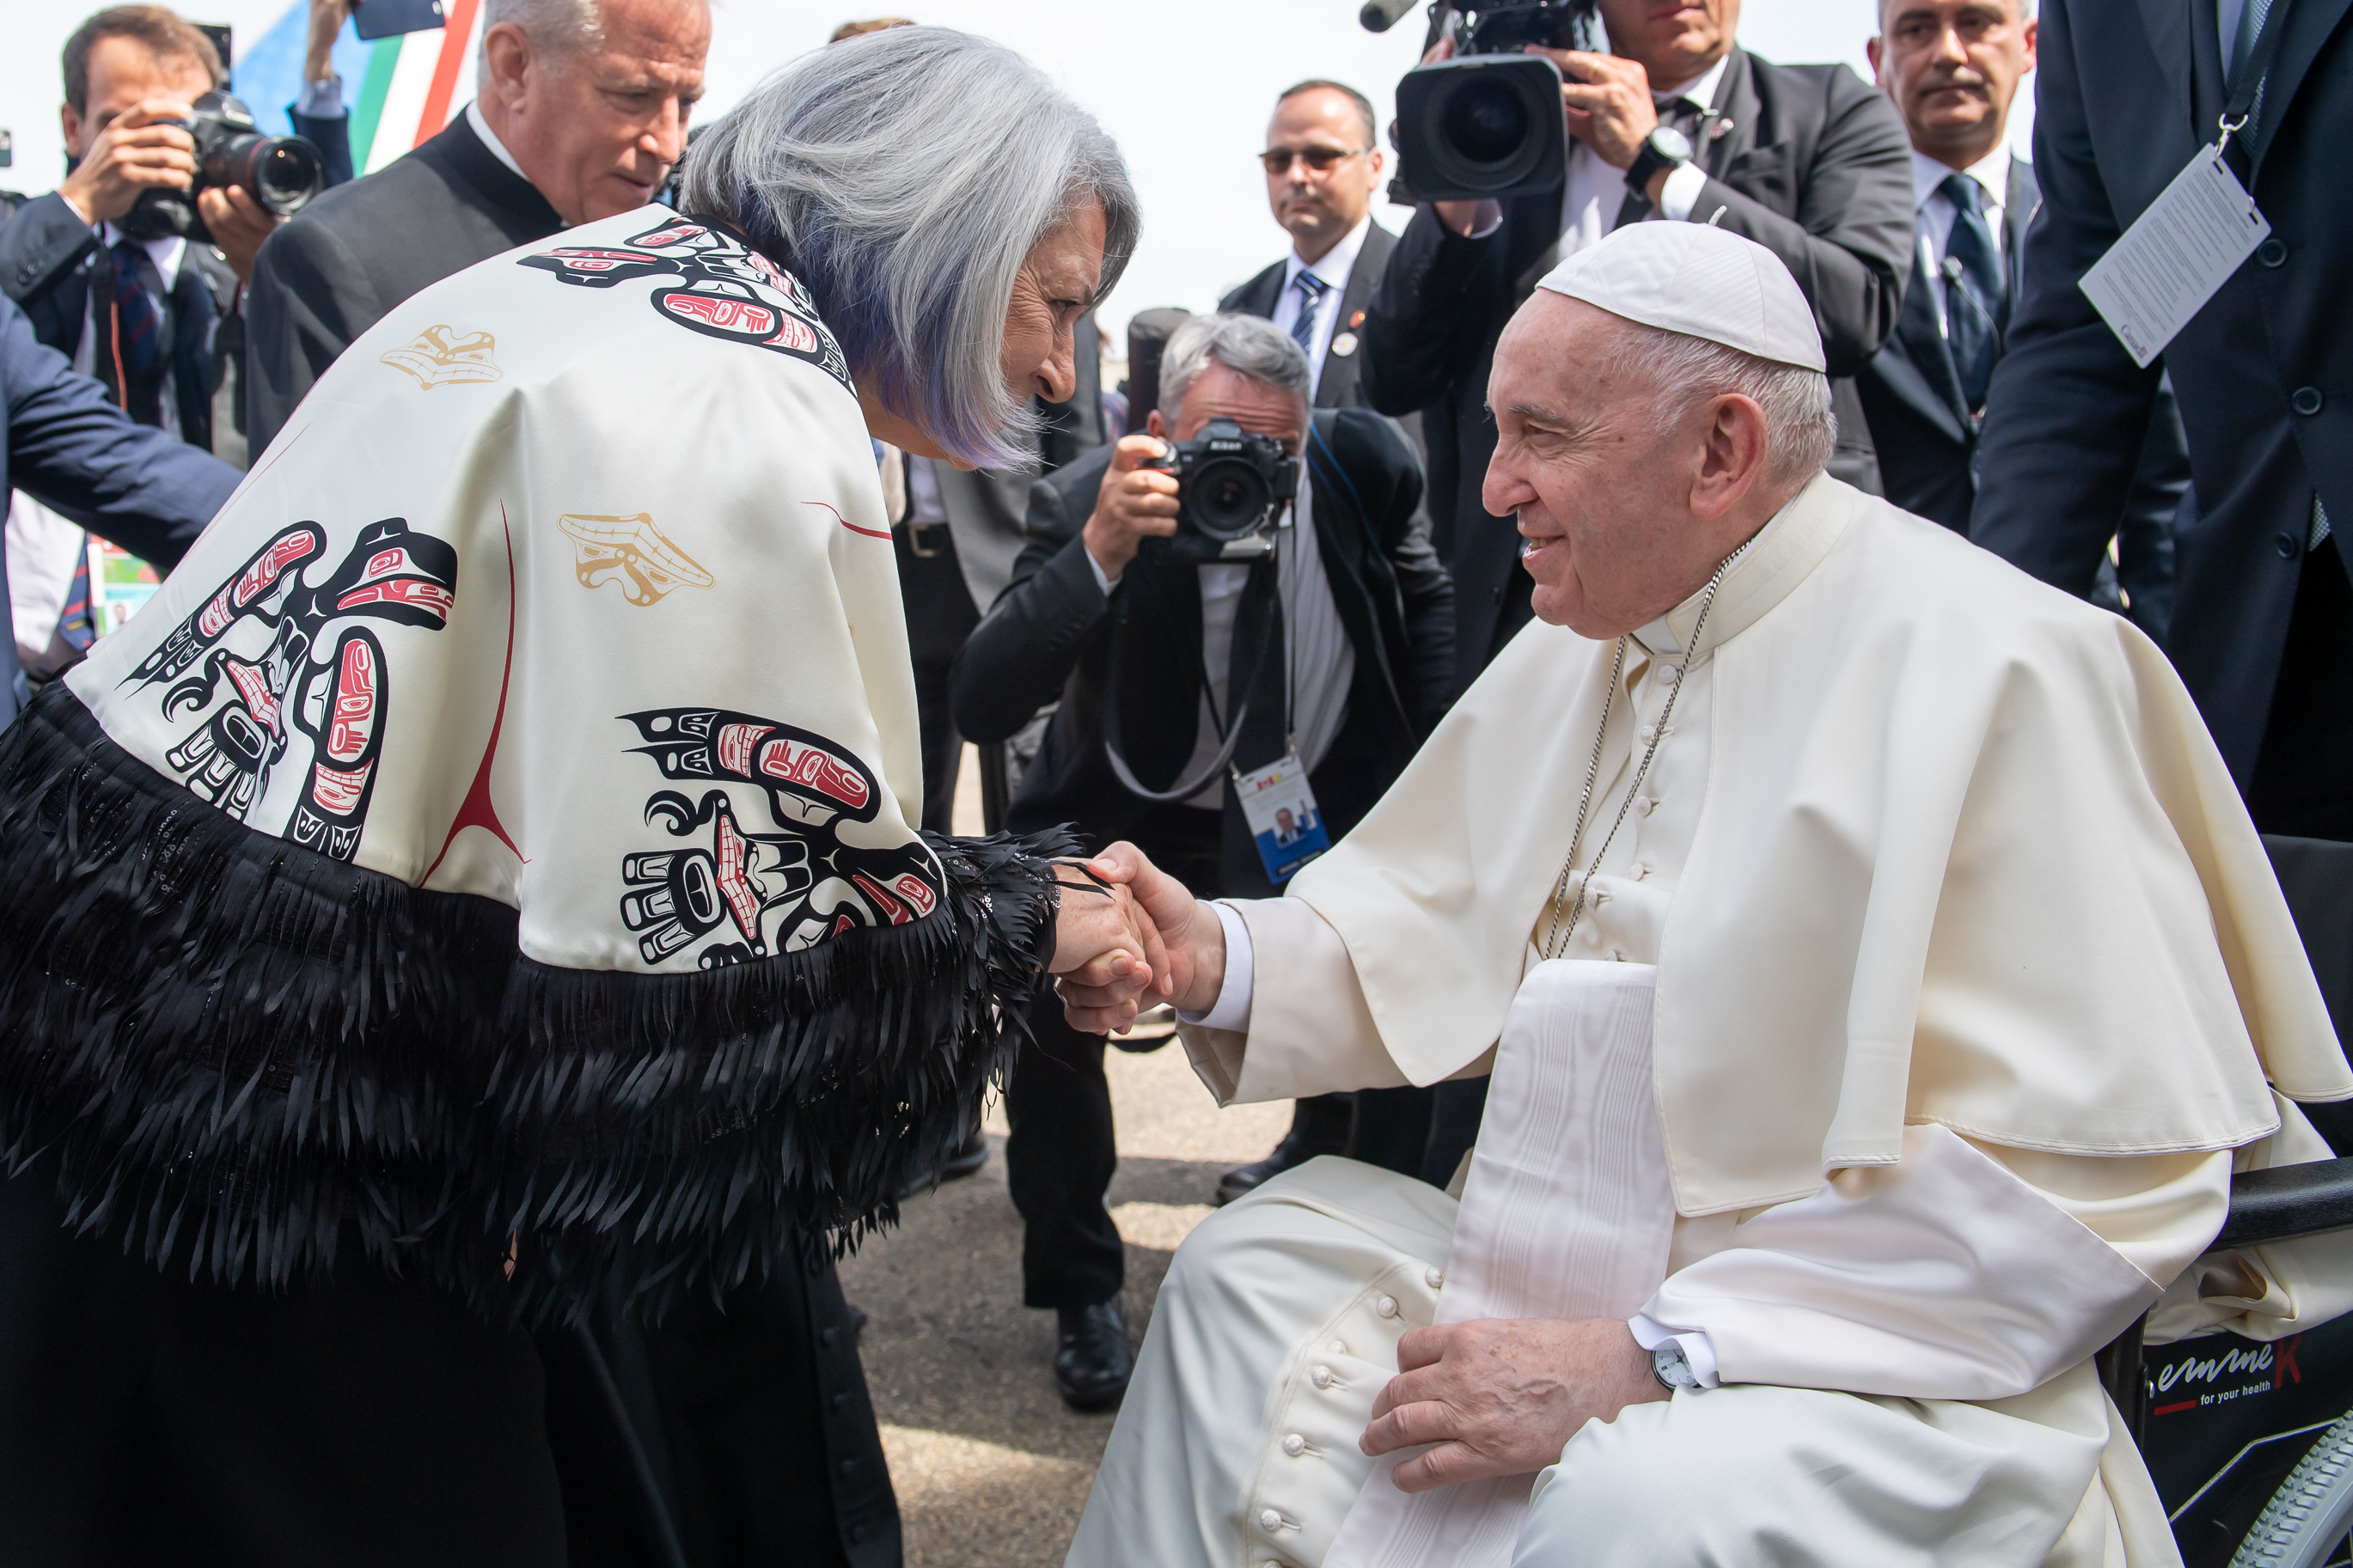 Governor General takes part in the visit of His Holiness Pope Francis | The General of Canada